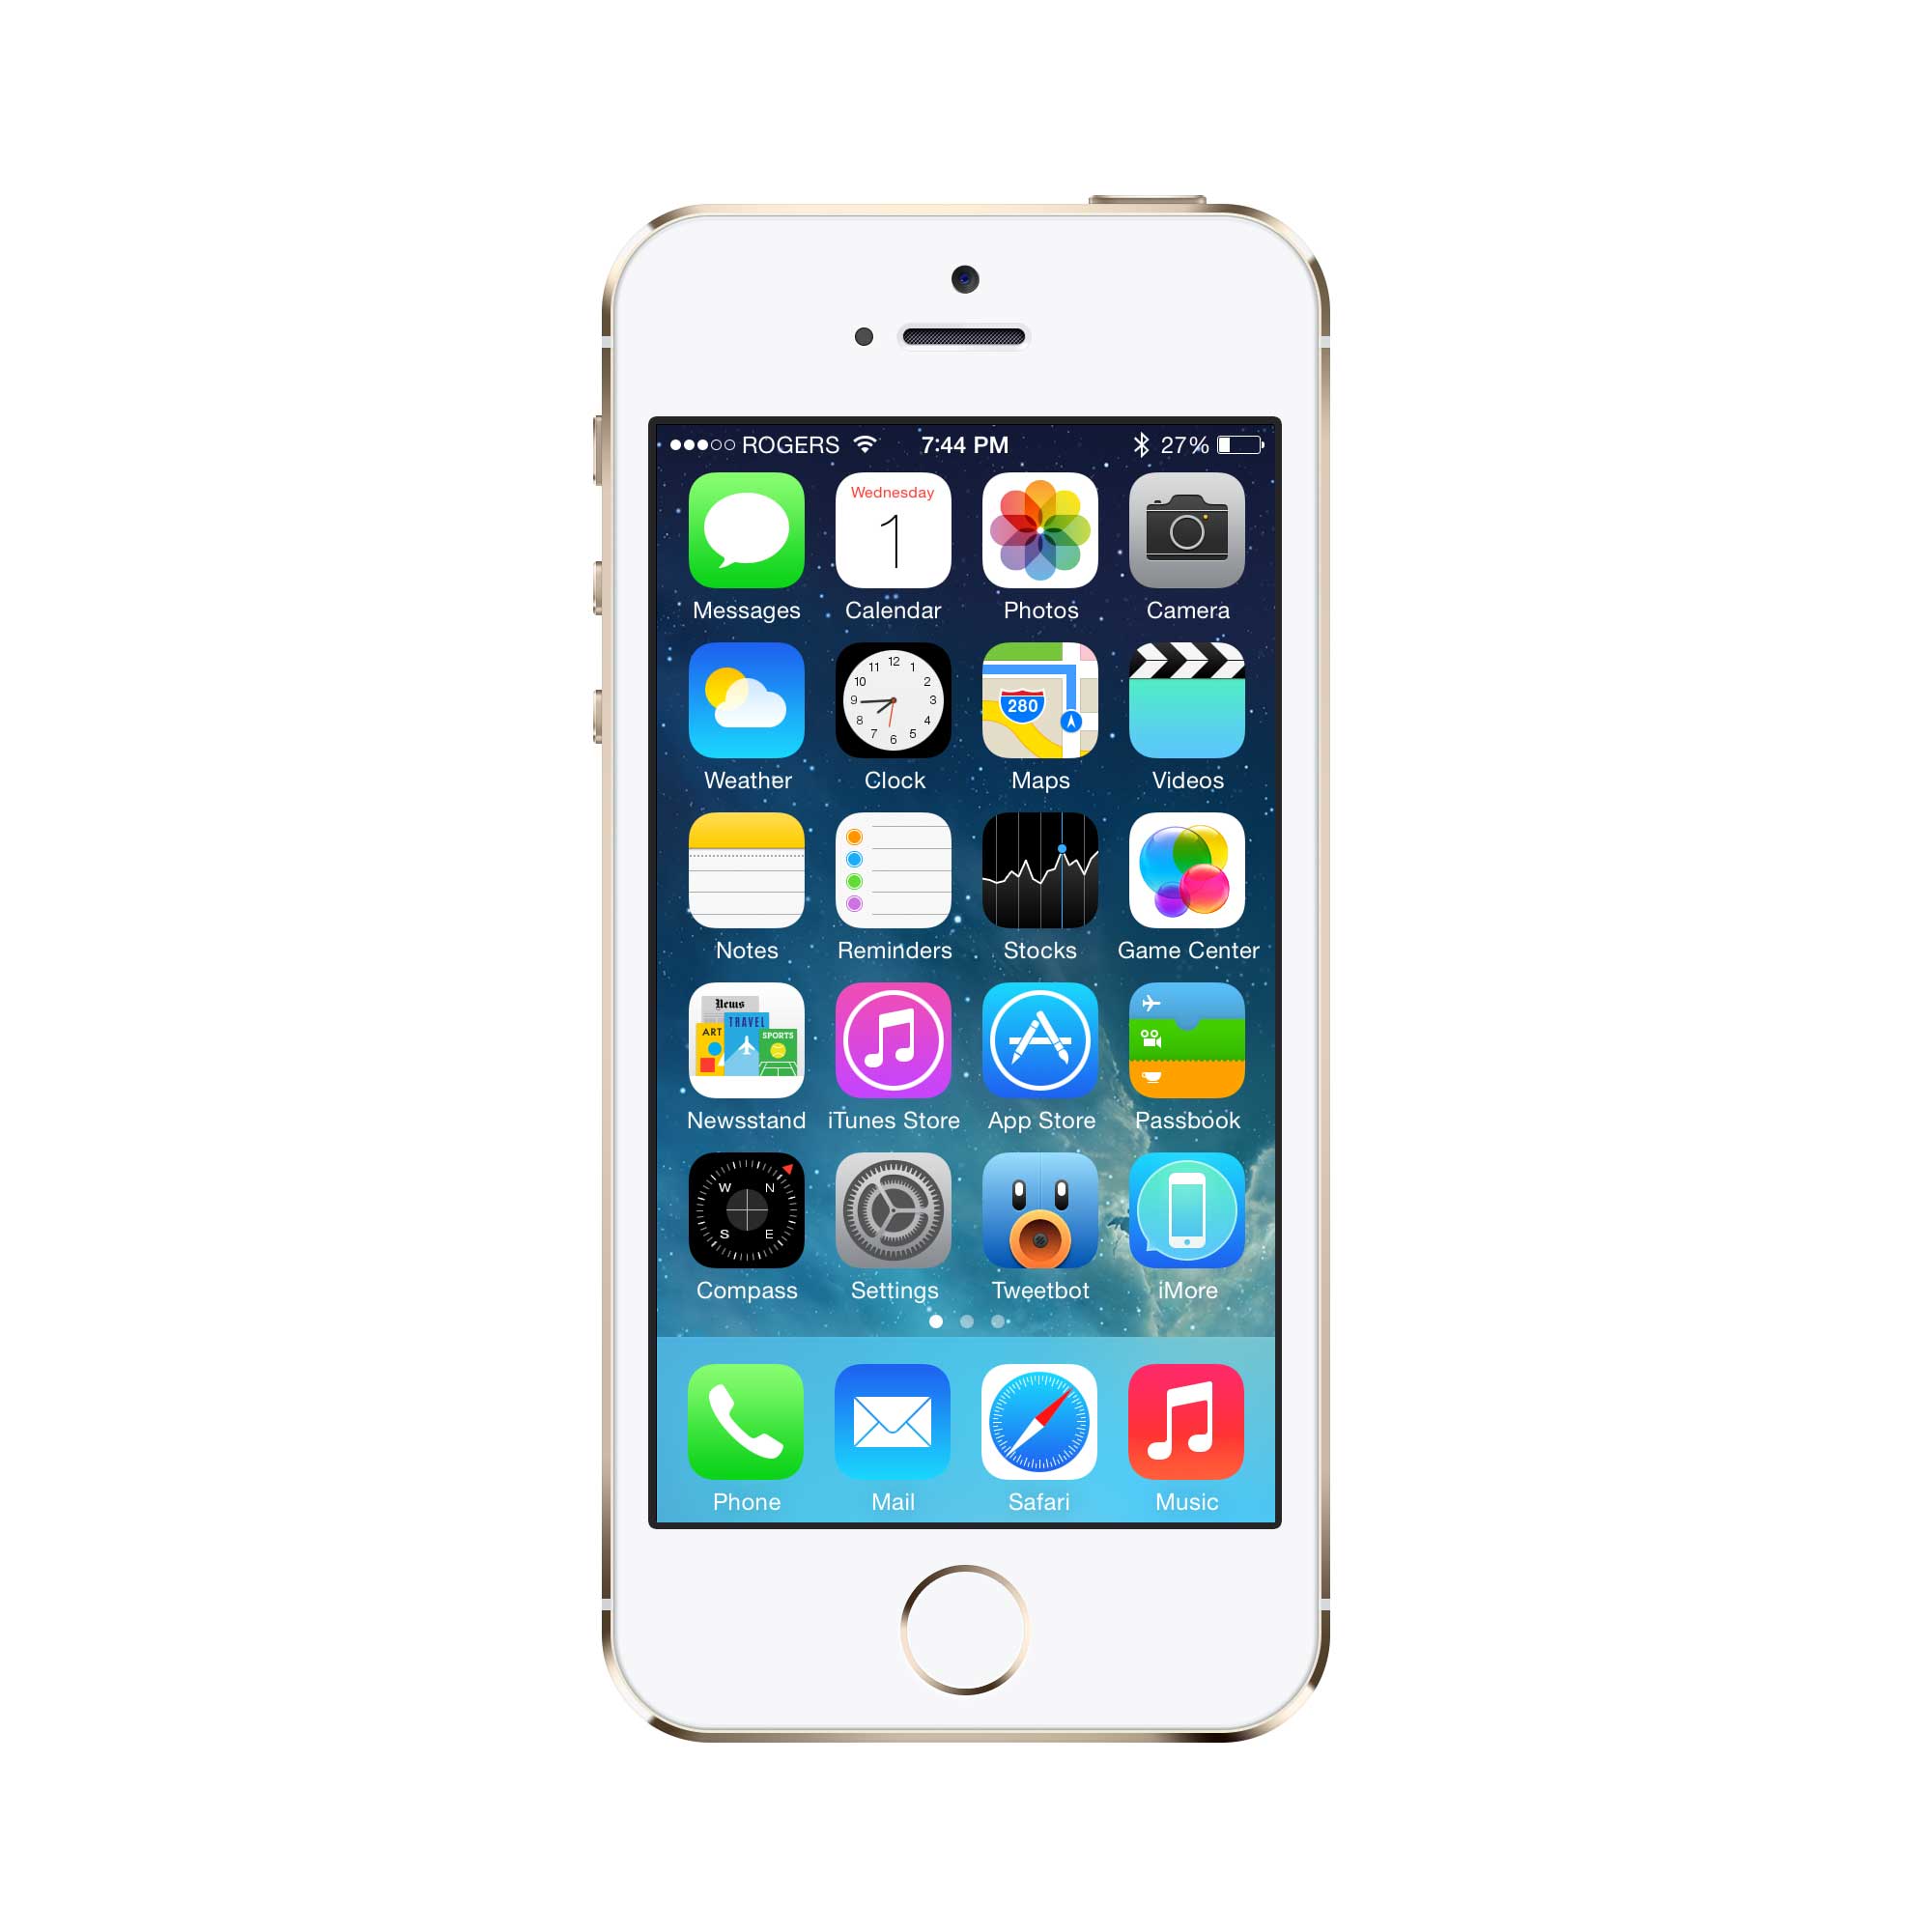 iPhonefixed – The Saviour of the iPhone 5s Screen